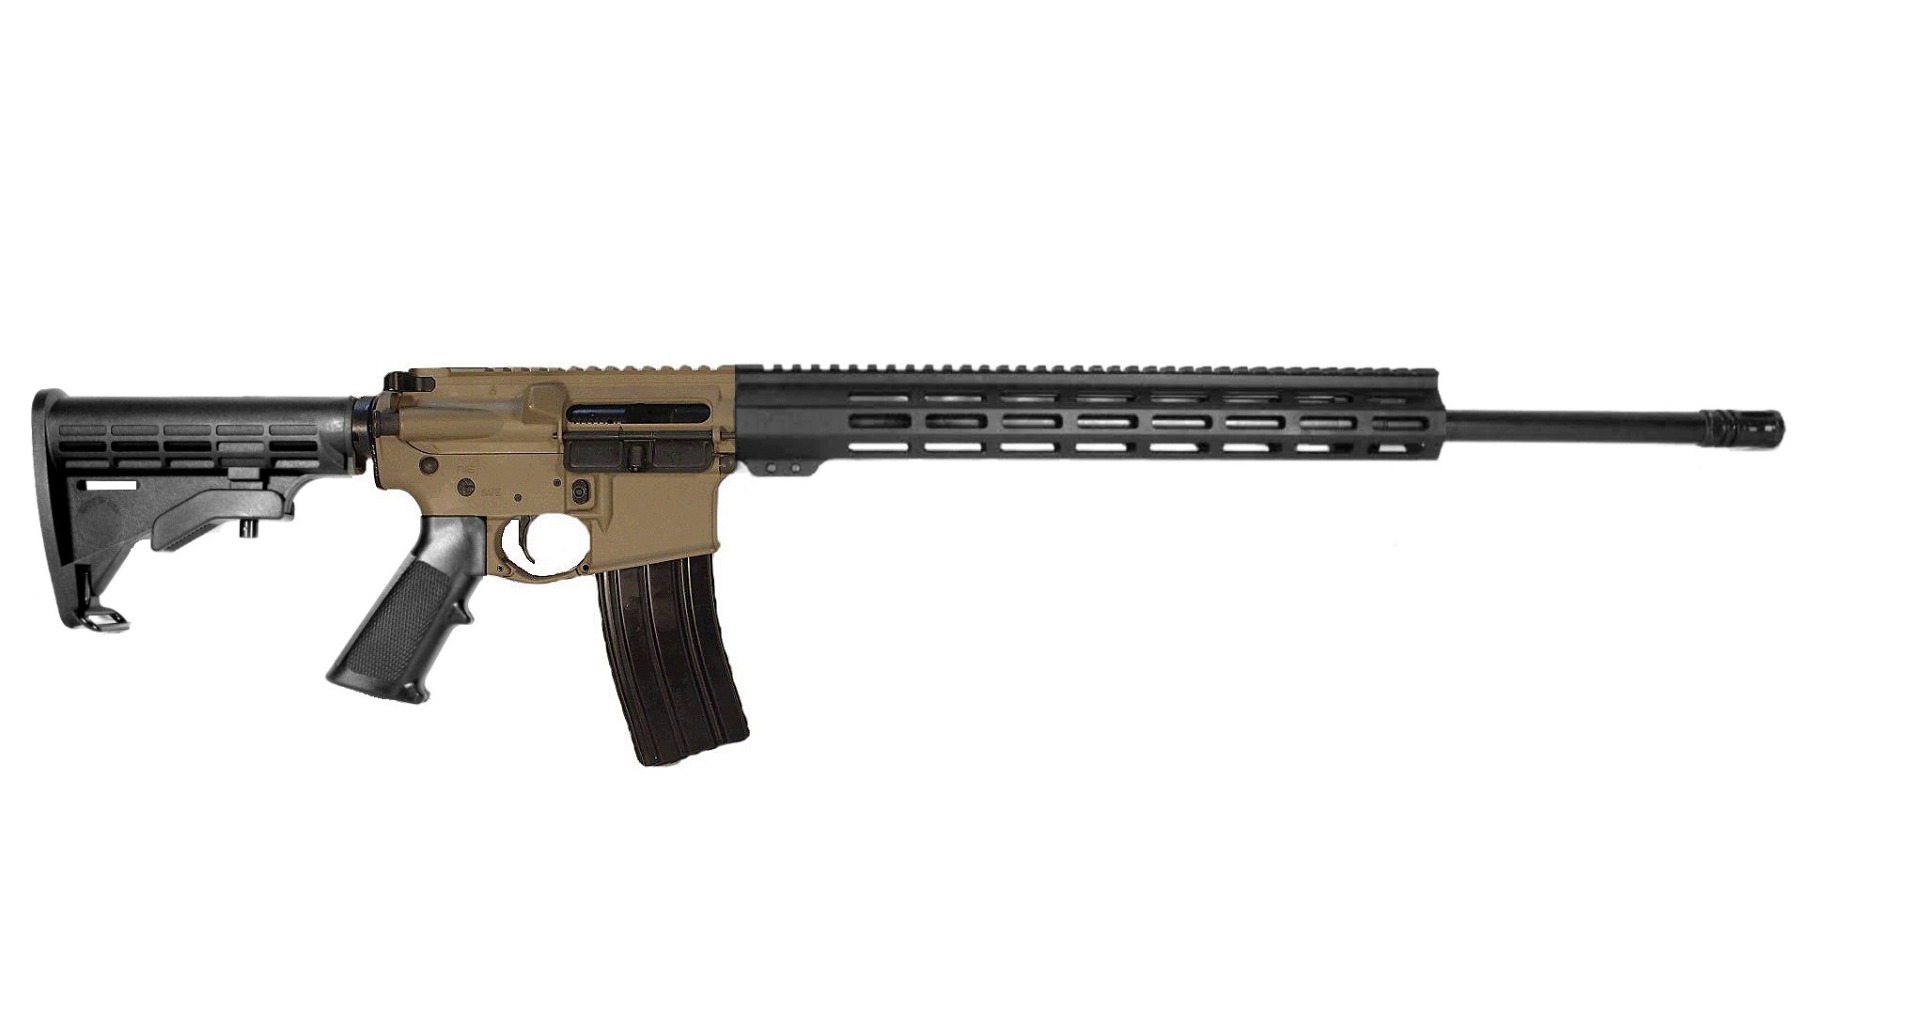 Pro2A Tactical's Patriot Line - 22 inch AR-15 224 Valkyrie Rifle Length M-LOK Rifle 